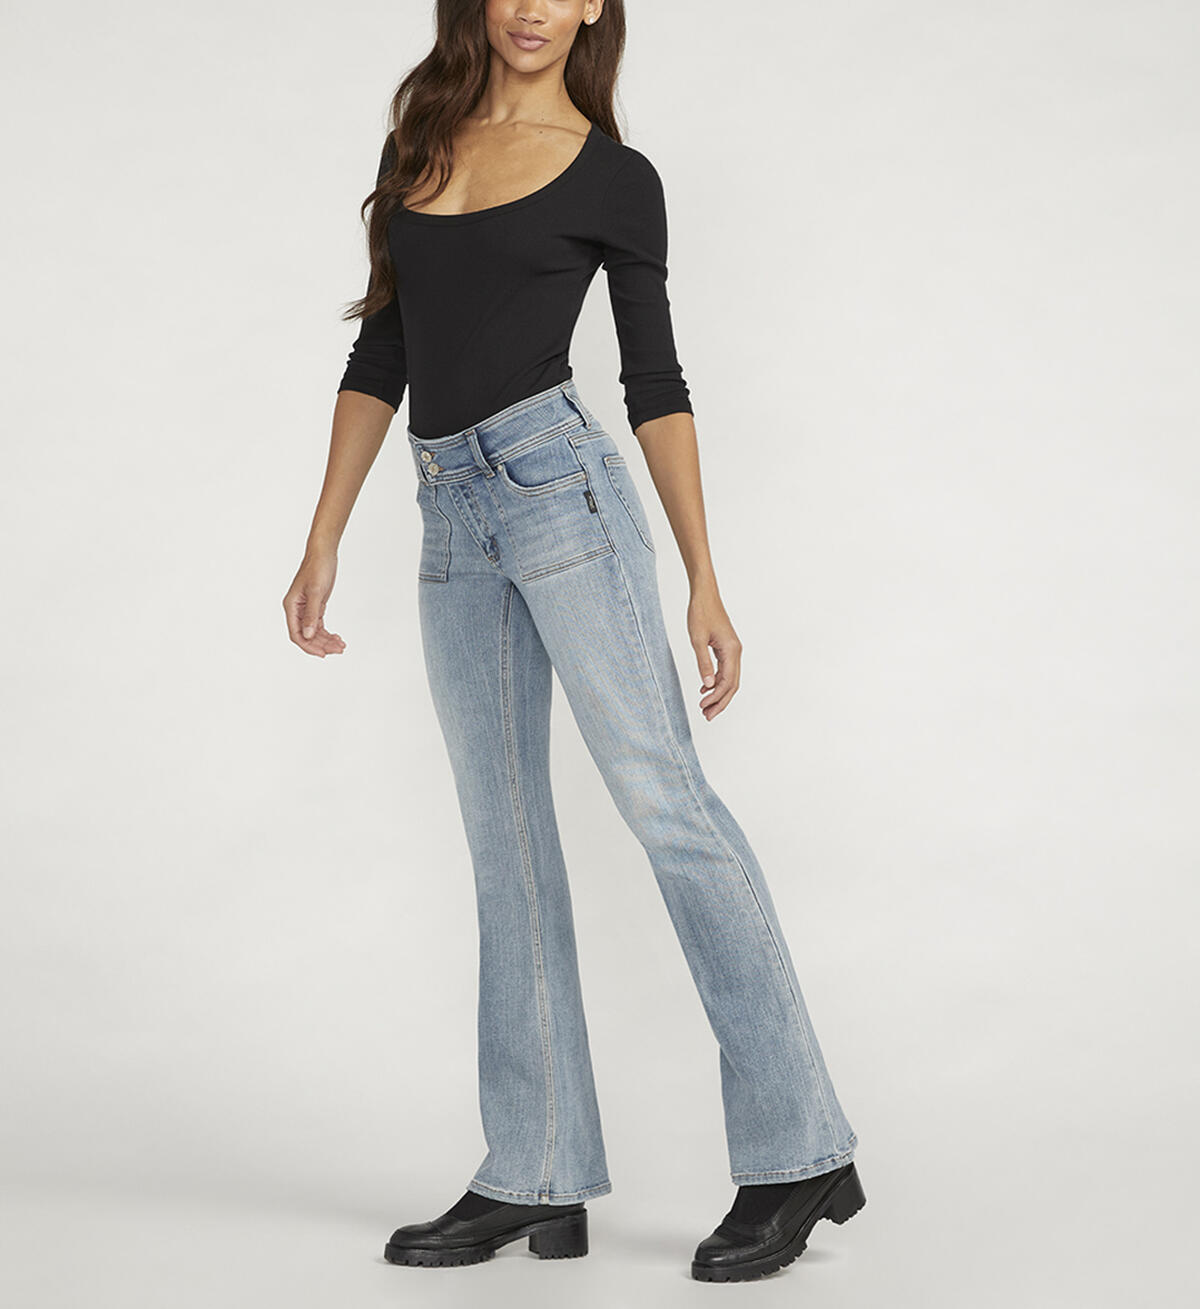 Be Low Low Rise Flare Jeans, Indigo, hi-res image number 2